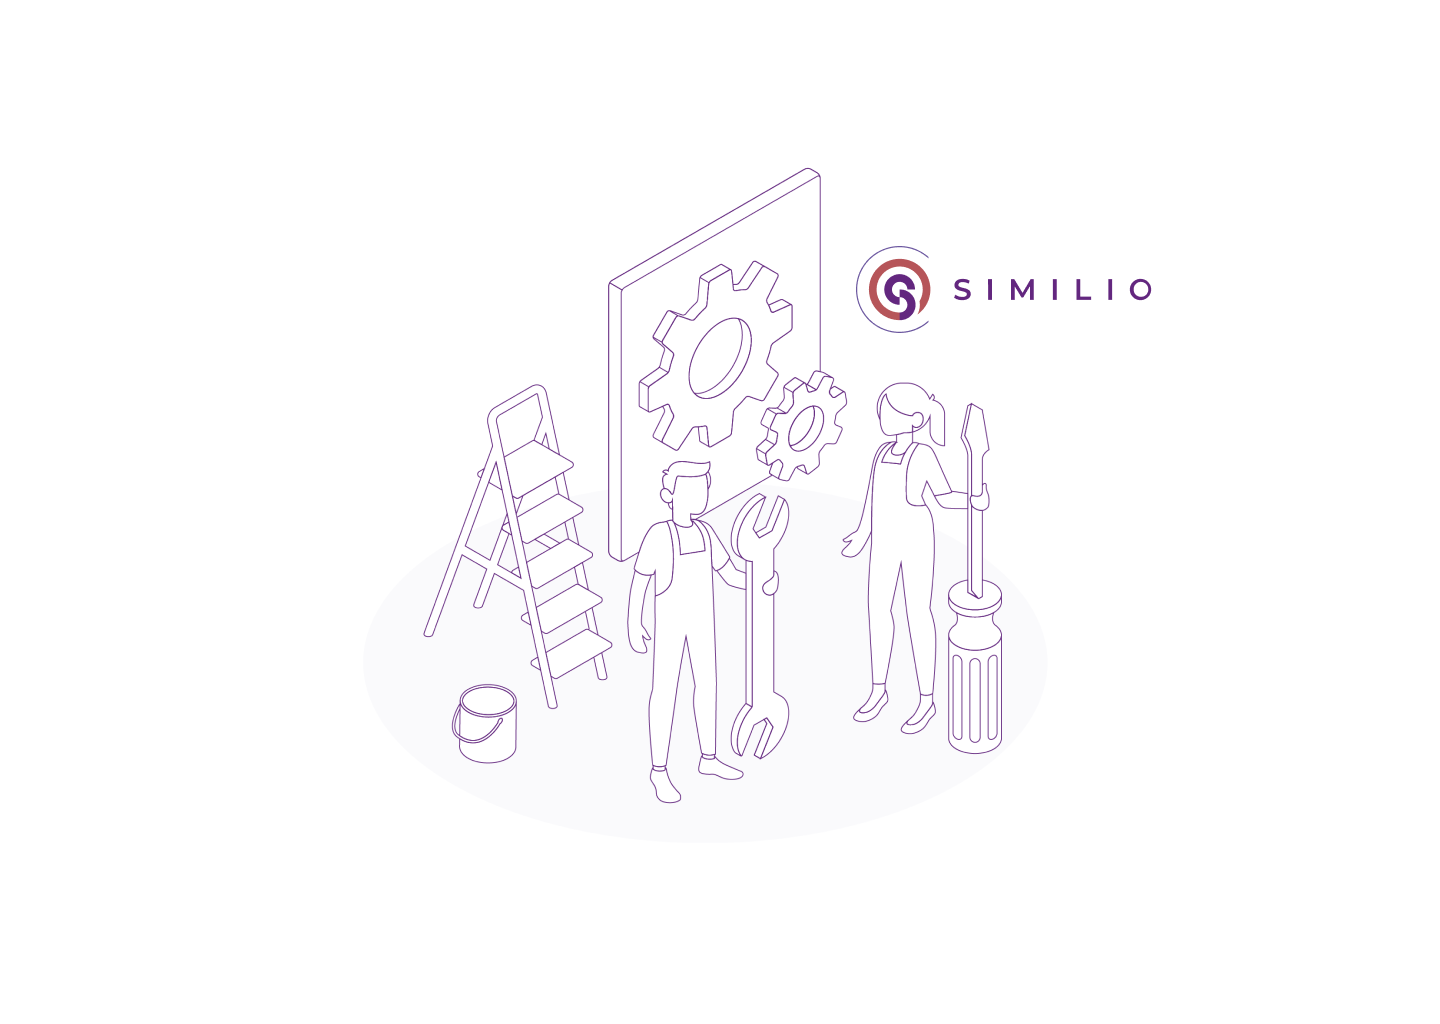 Similio companies cluster Objects industry Maintenance